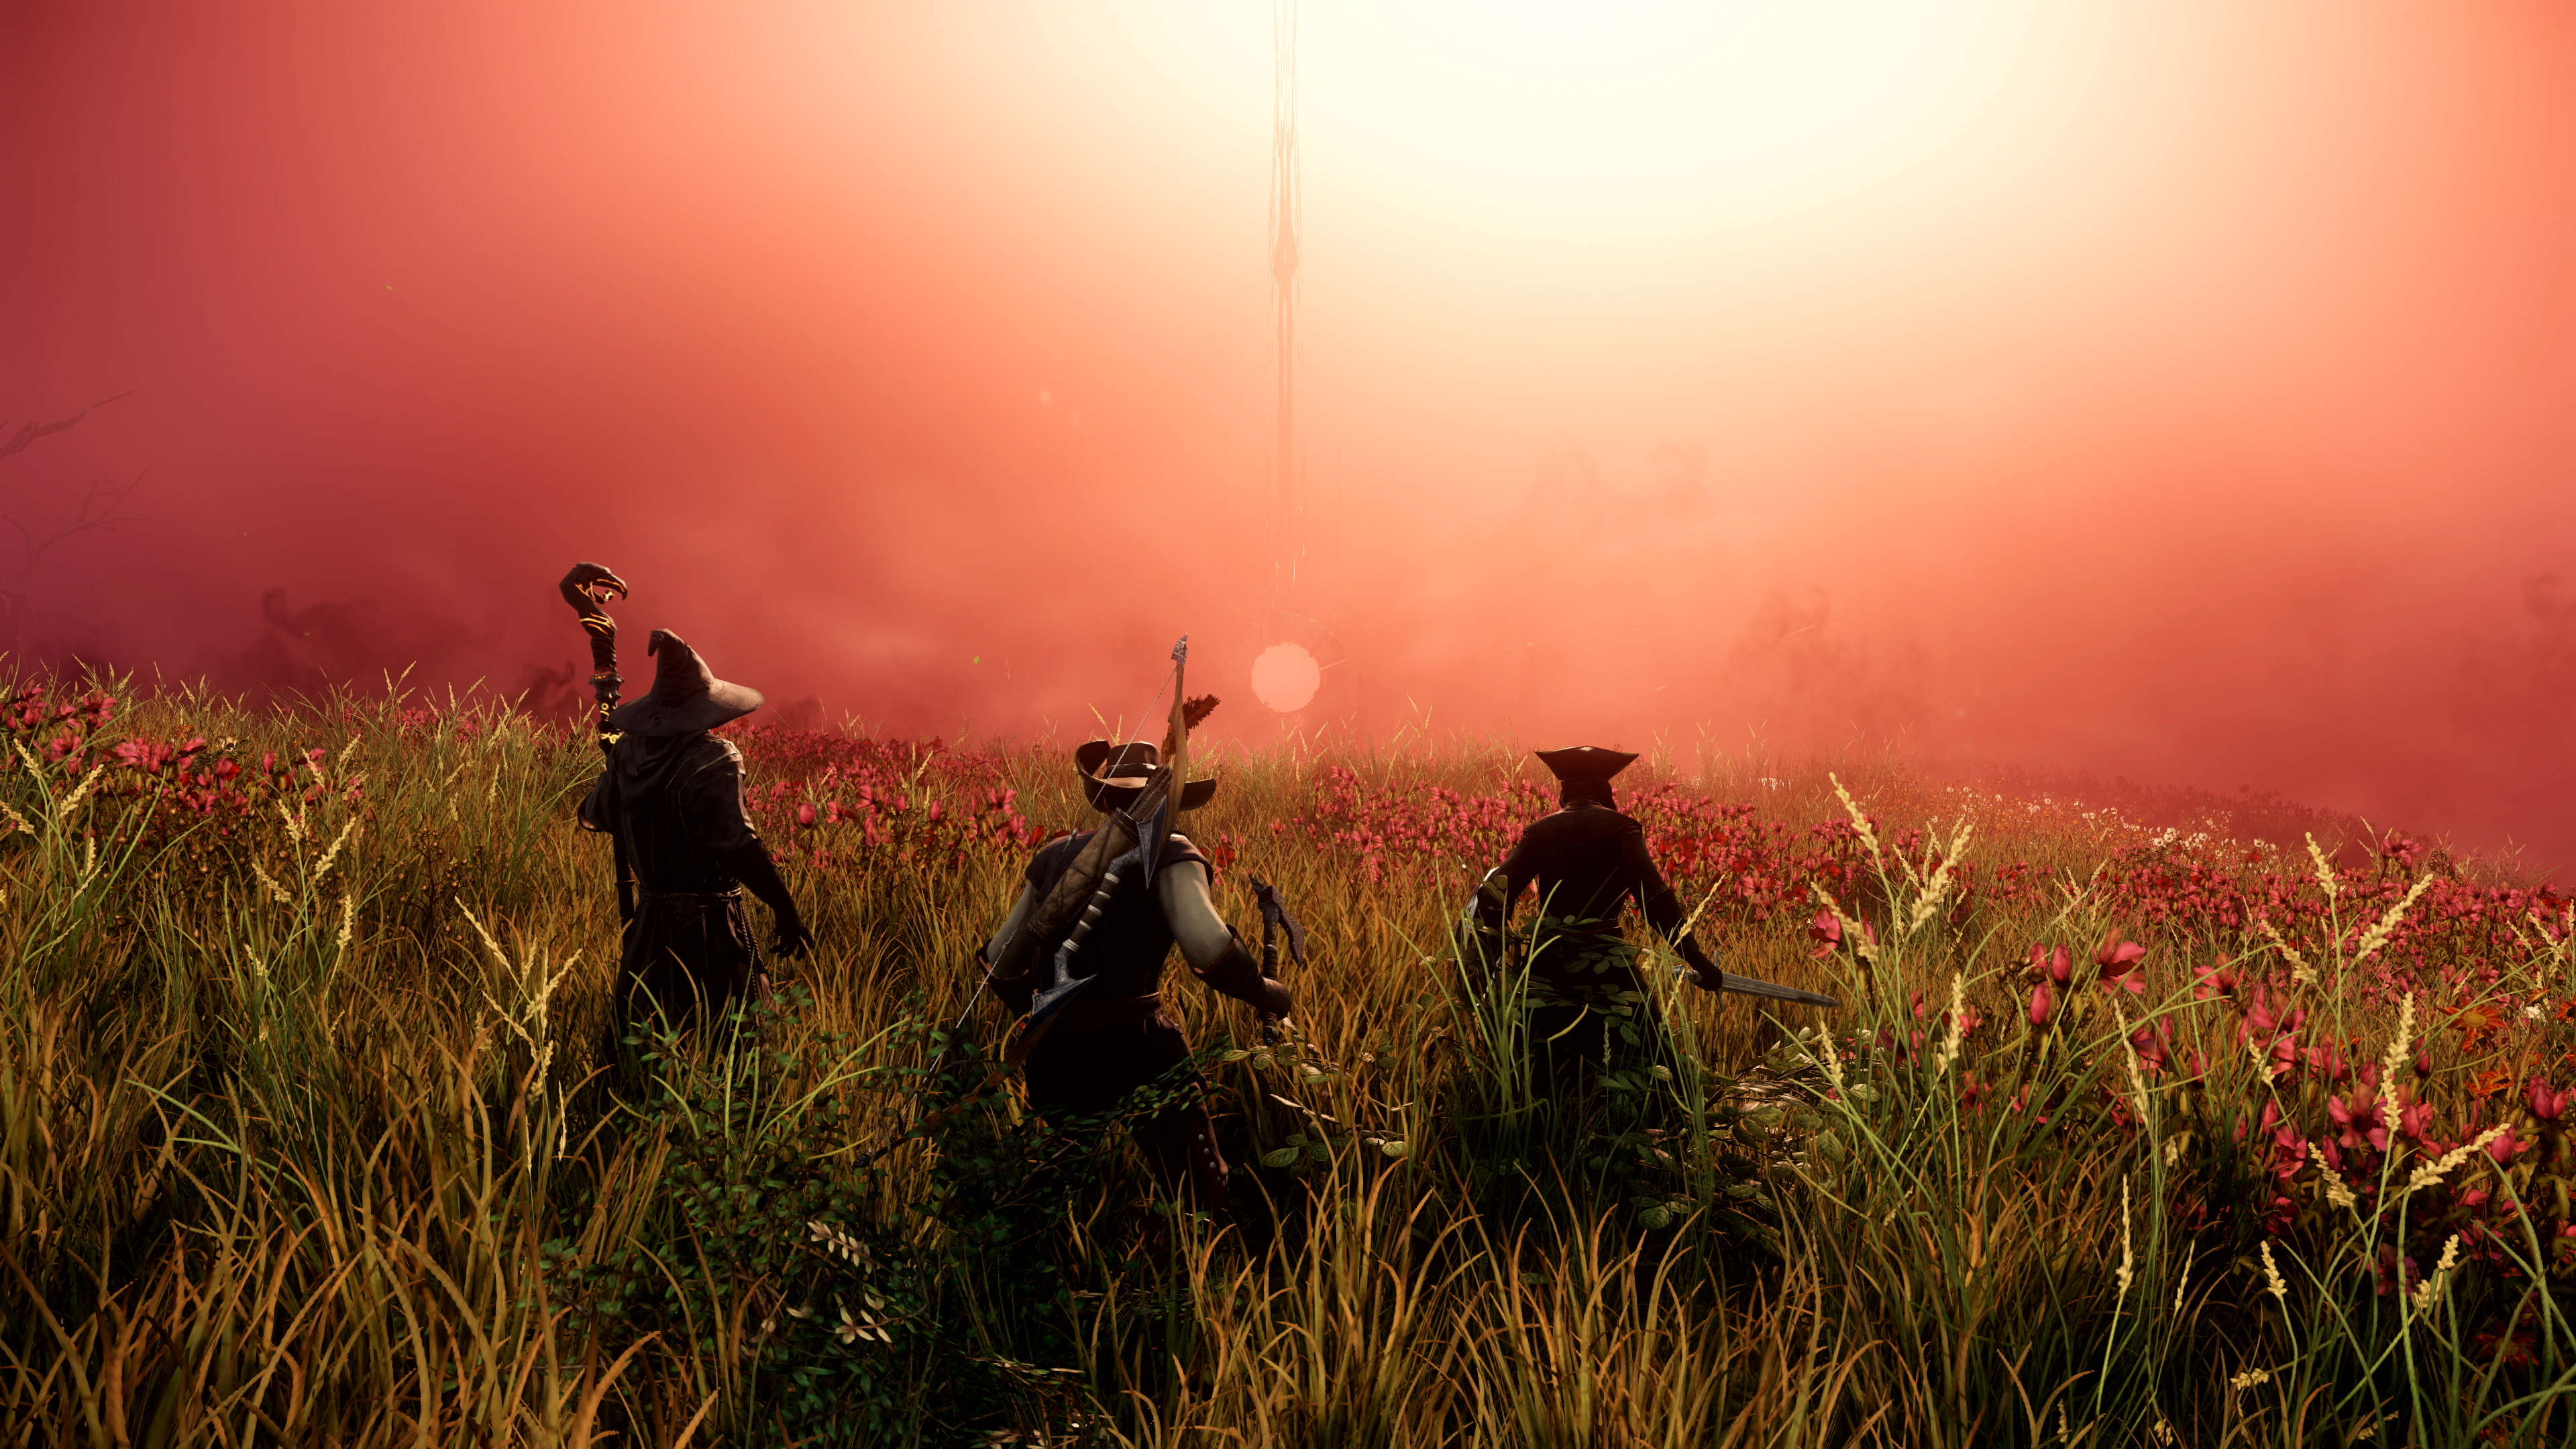 New World gets a new combat trailer, pre-orderers get beta access in July